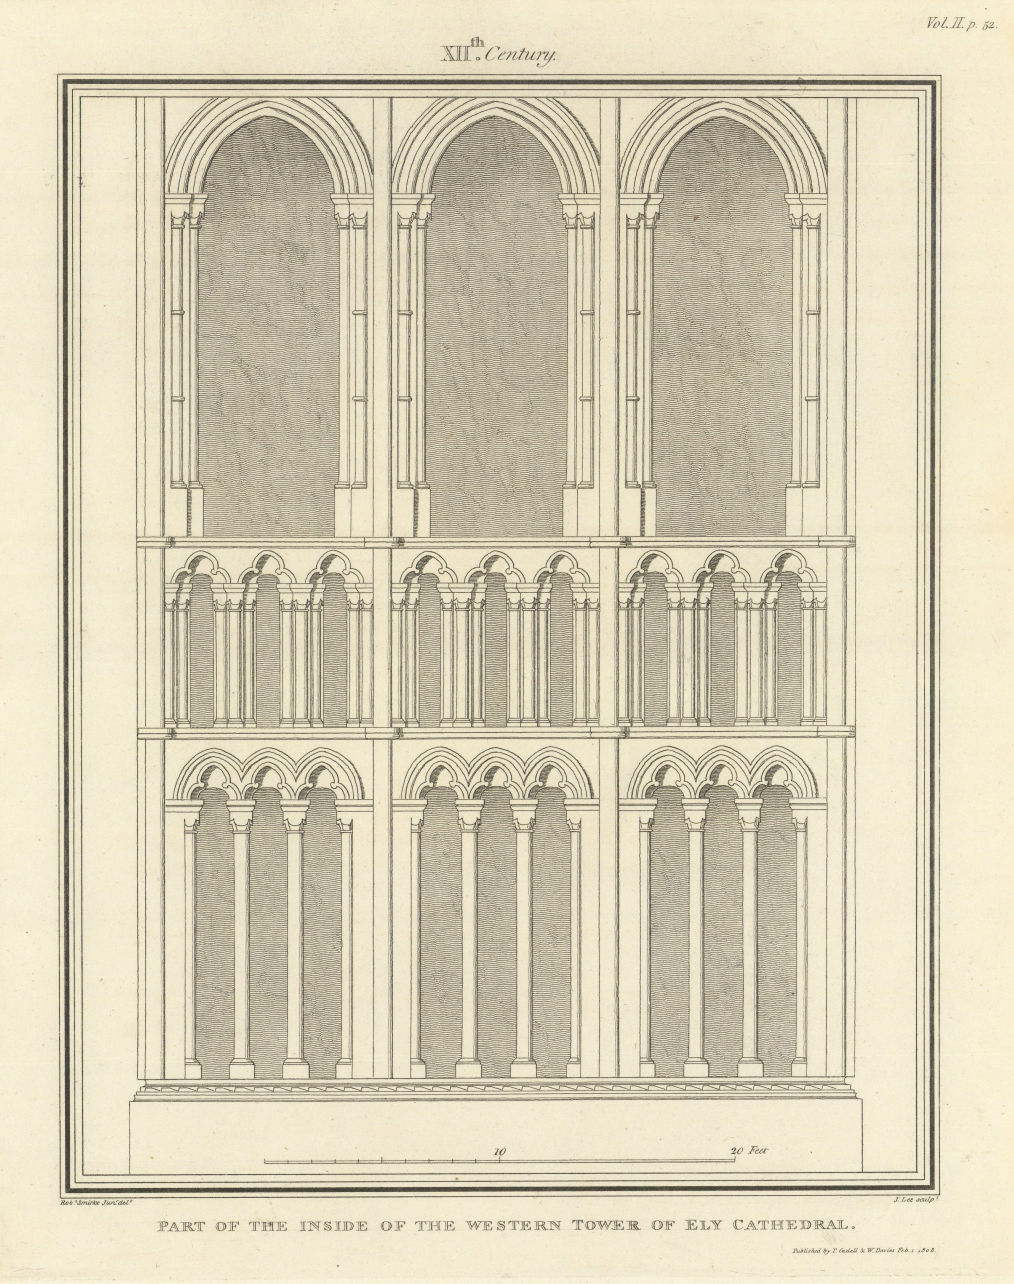 Part of the inside of the Western Tower of Ely Cathedral. SMIRKE 1810 print